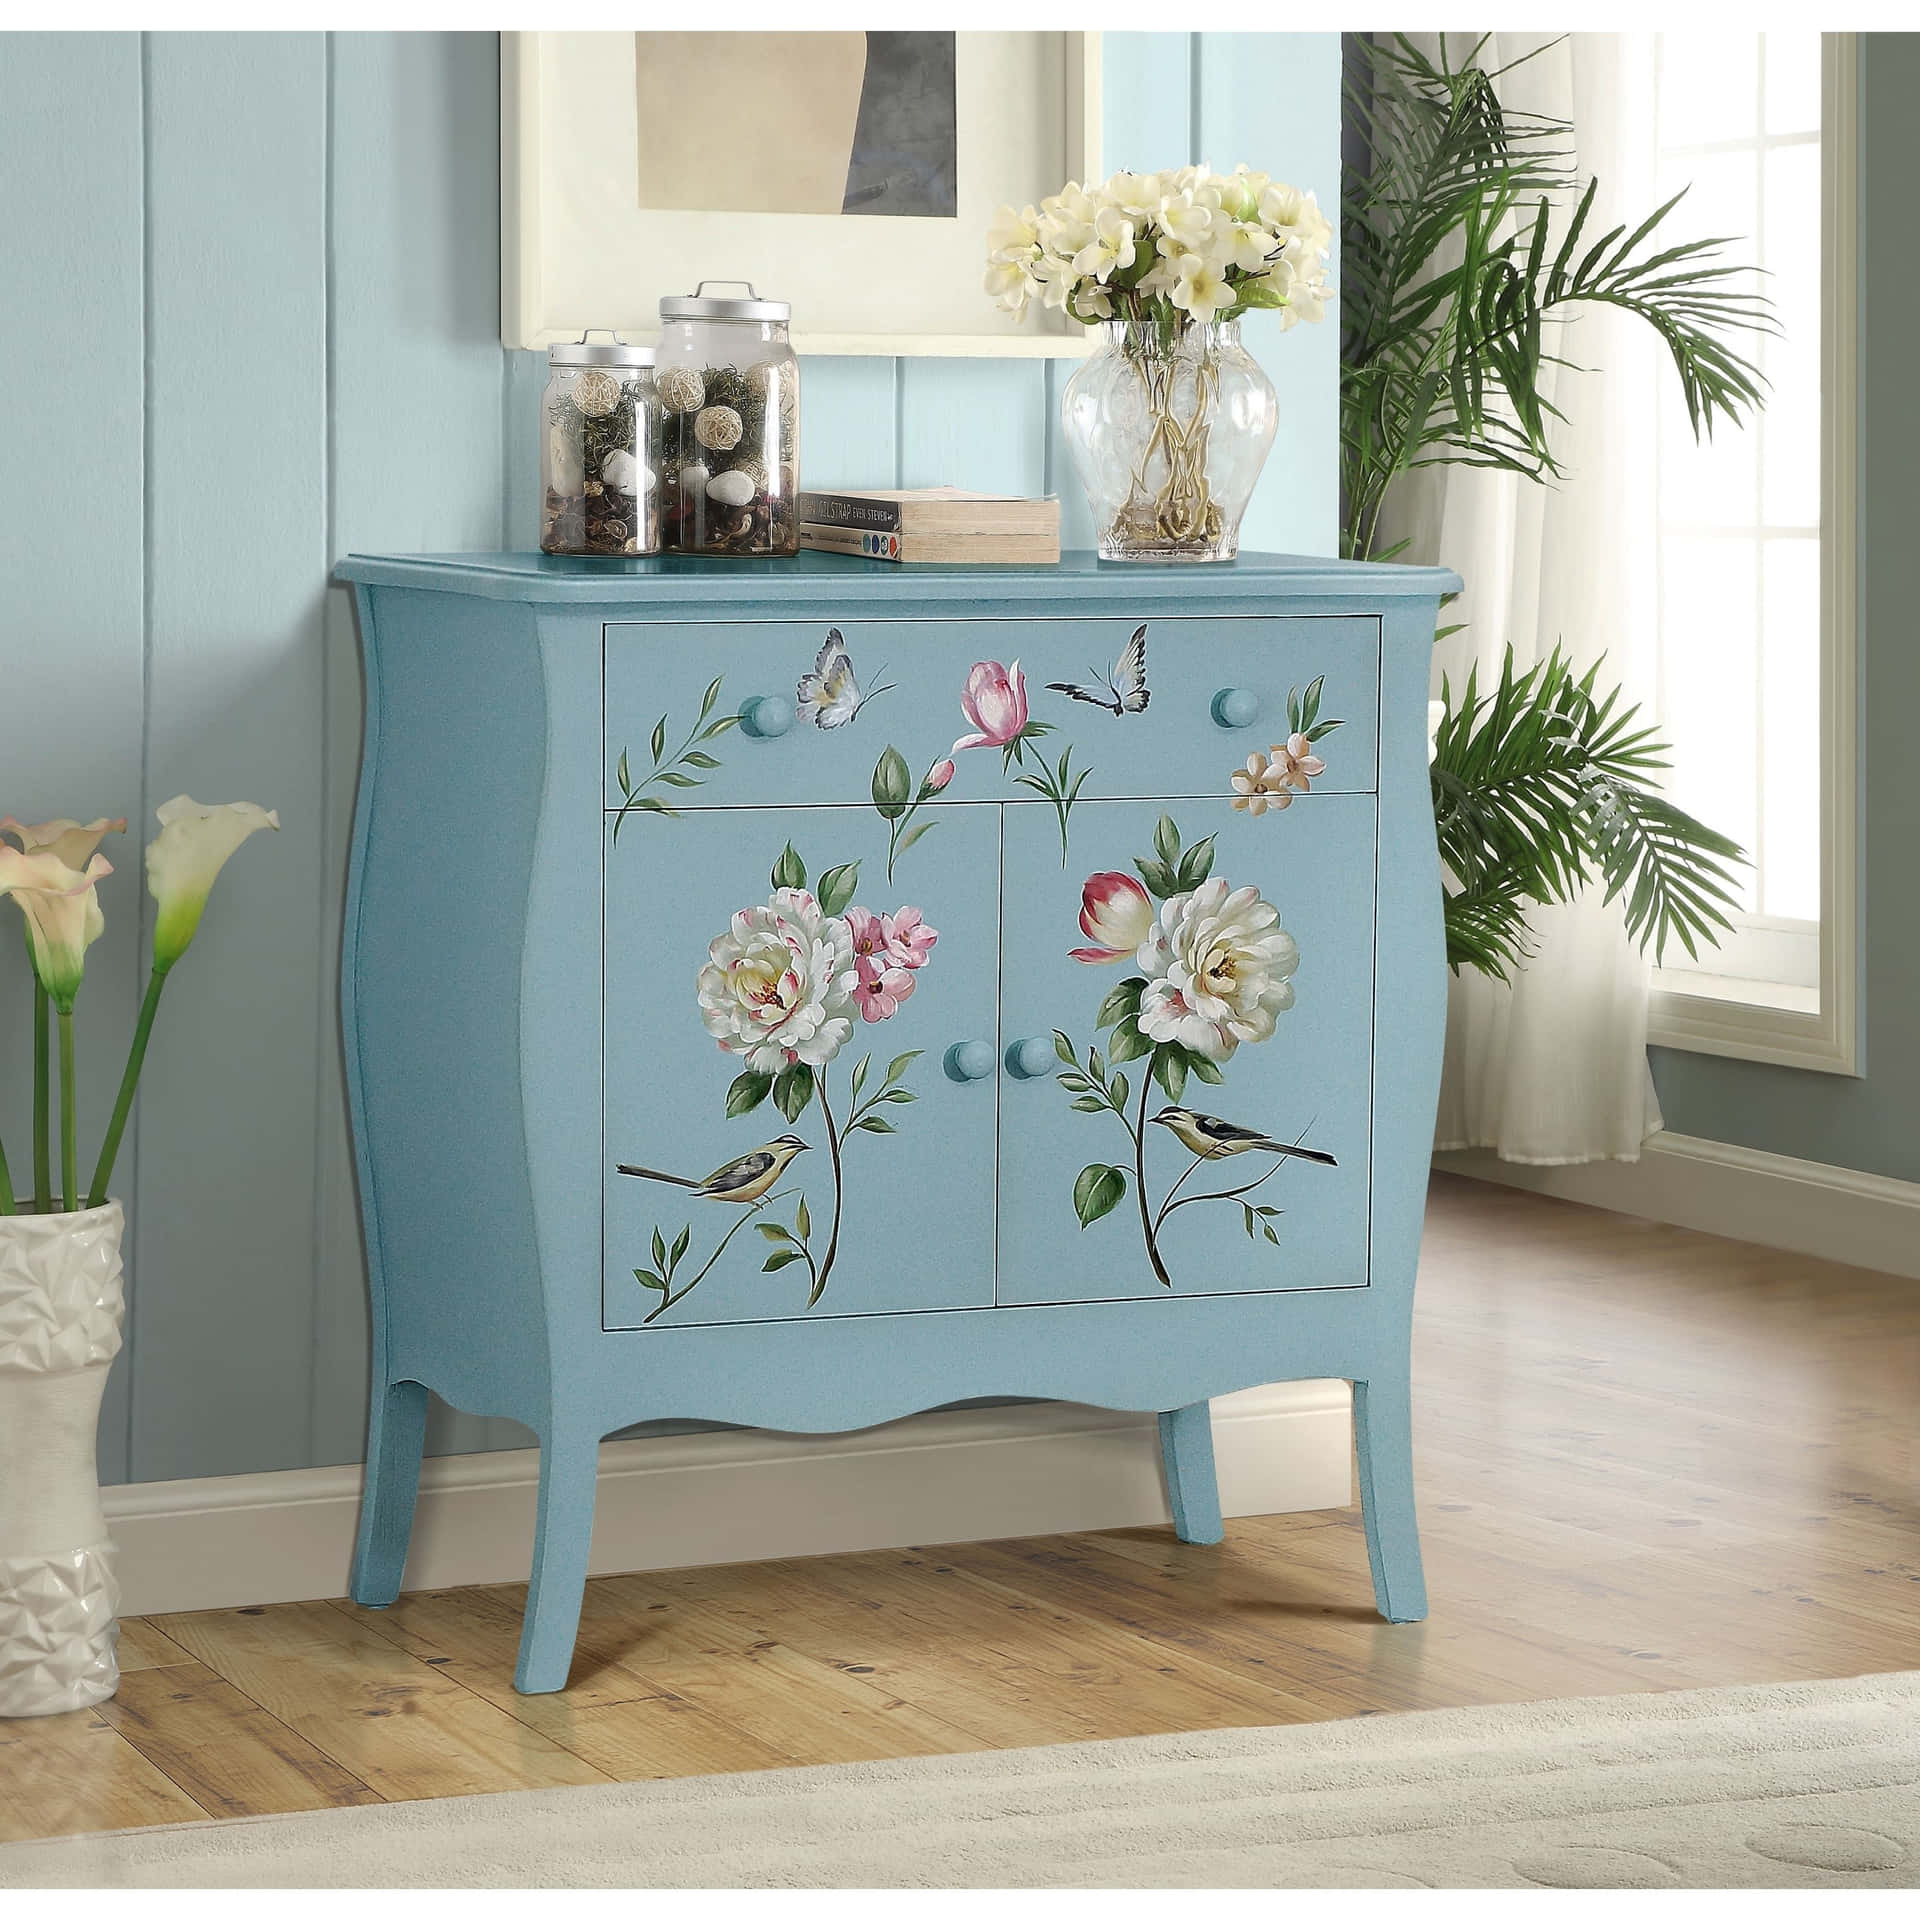 A Blue Painted Cabinet With Flowers On It